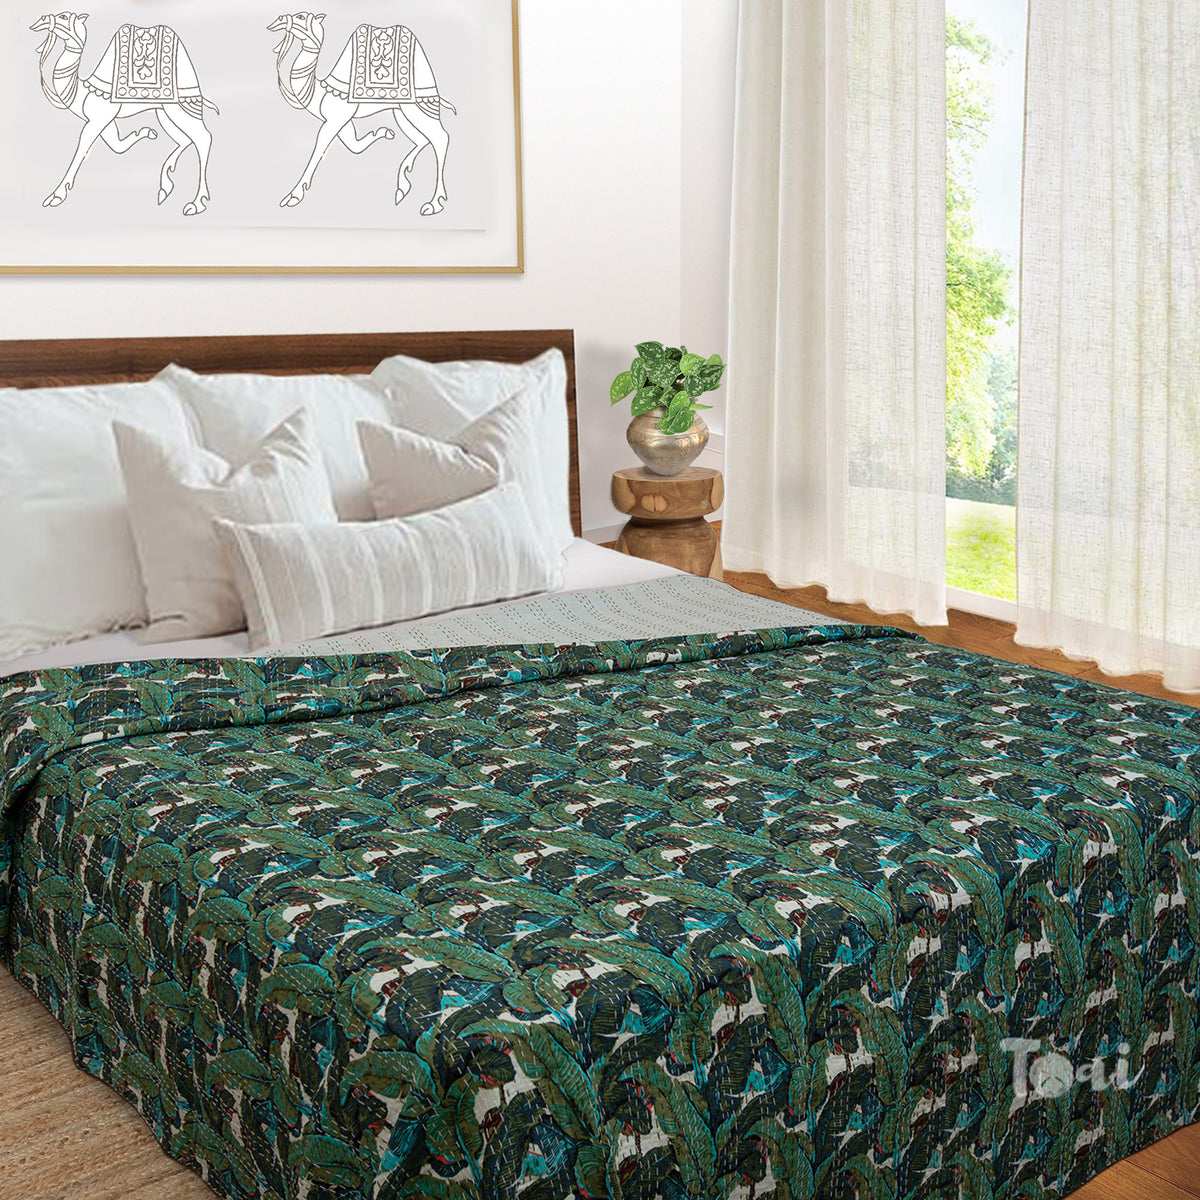 BananaLeaves |Kantha Stitched |Hand Screen Printed |Double Bed- Queen Size| Premium Pure Cotton| Bed cover